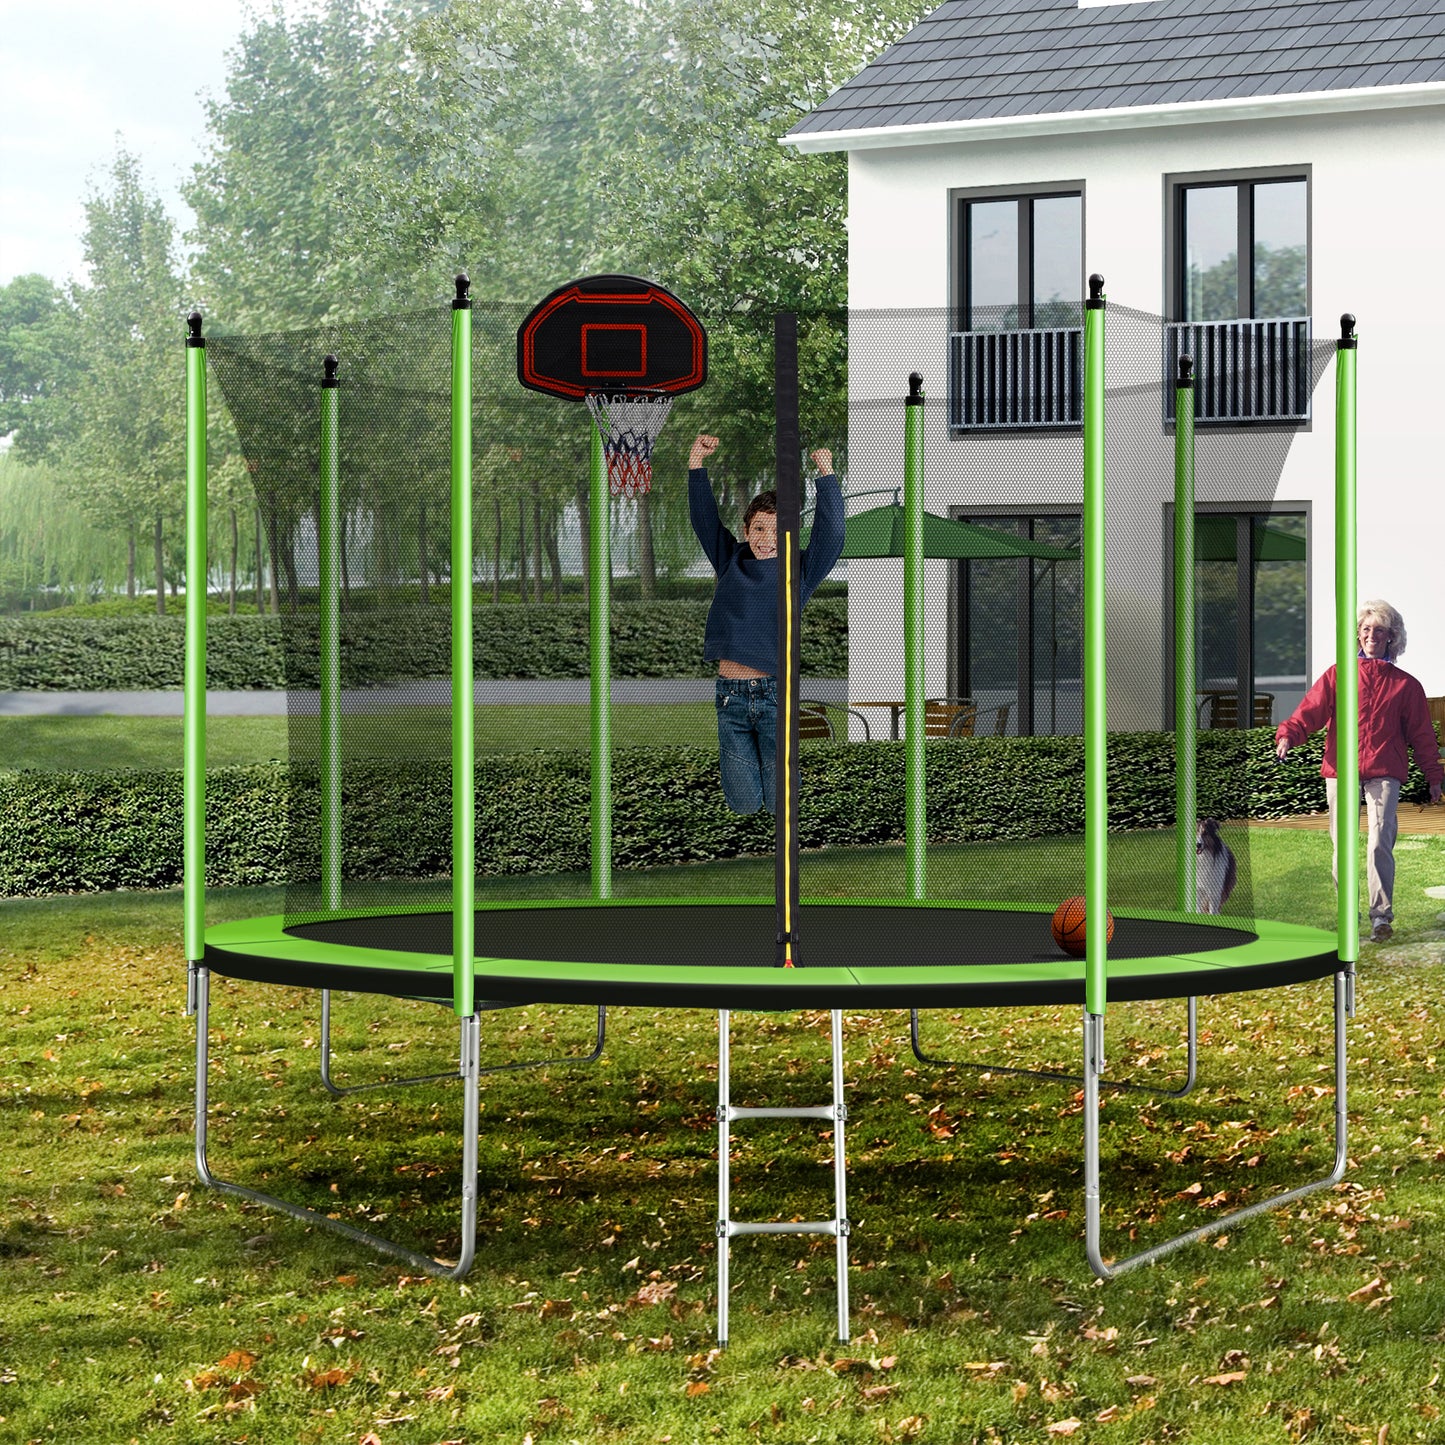 10FT  Trampoline with Basketball Hoop Inflator and Ladder